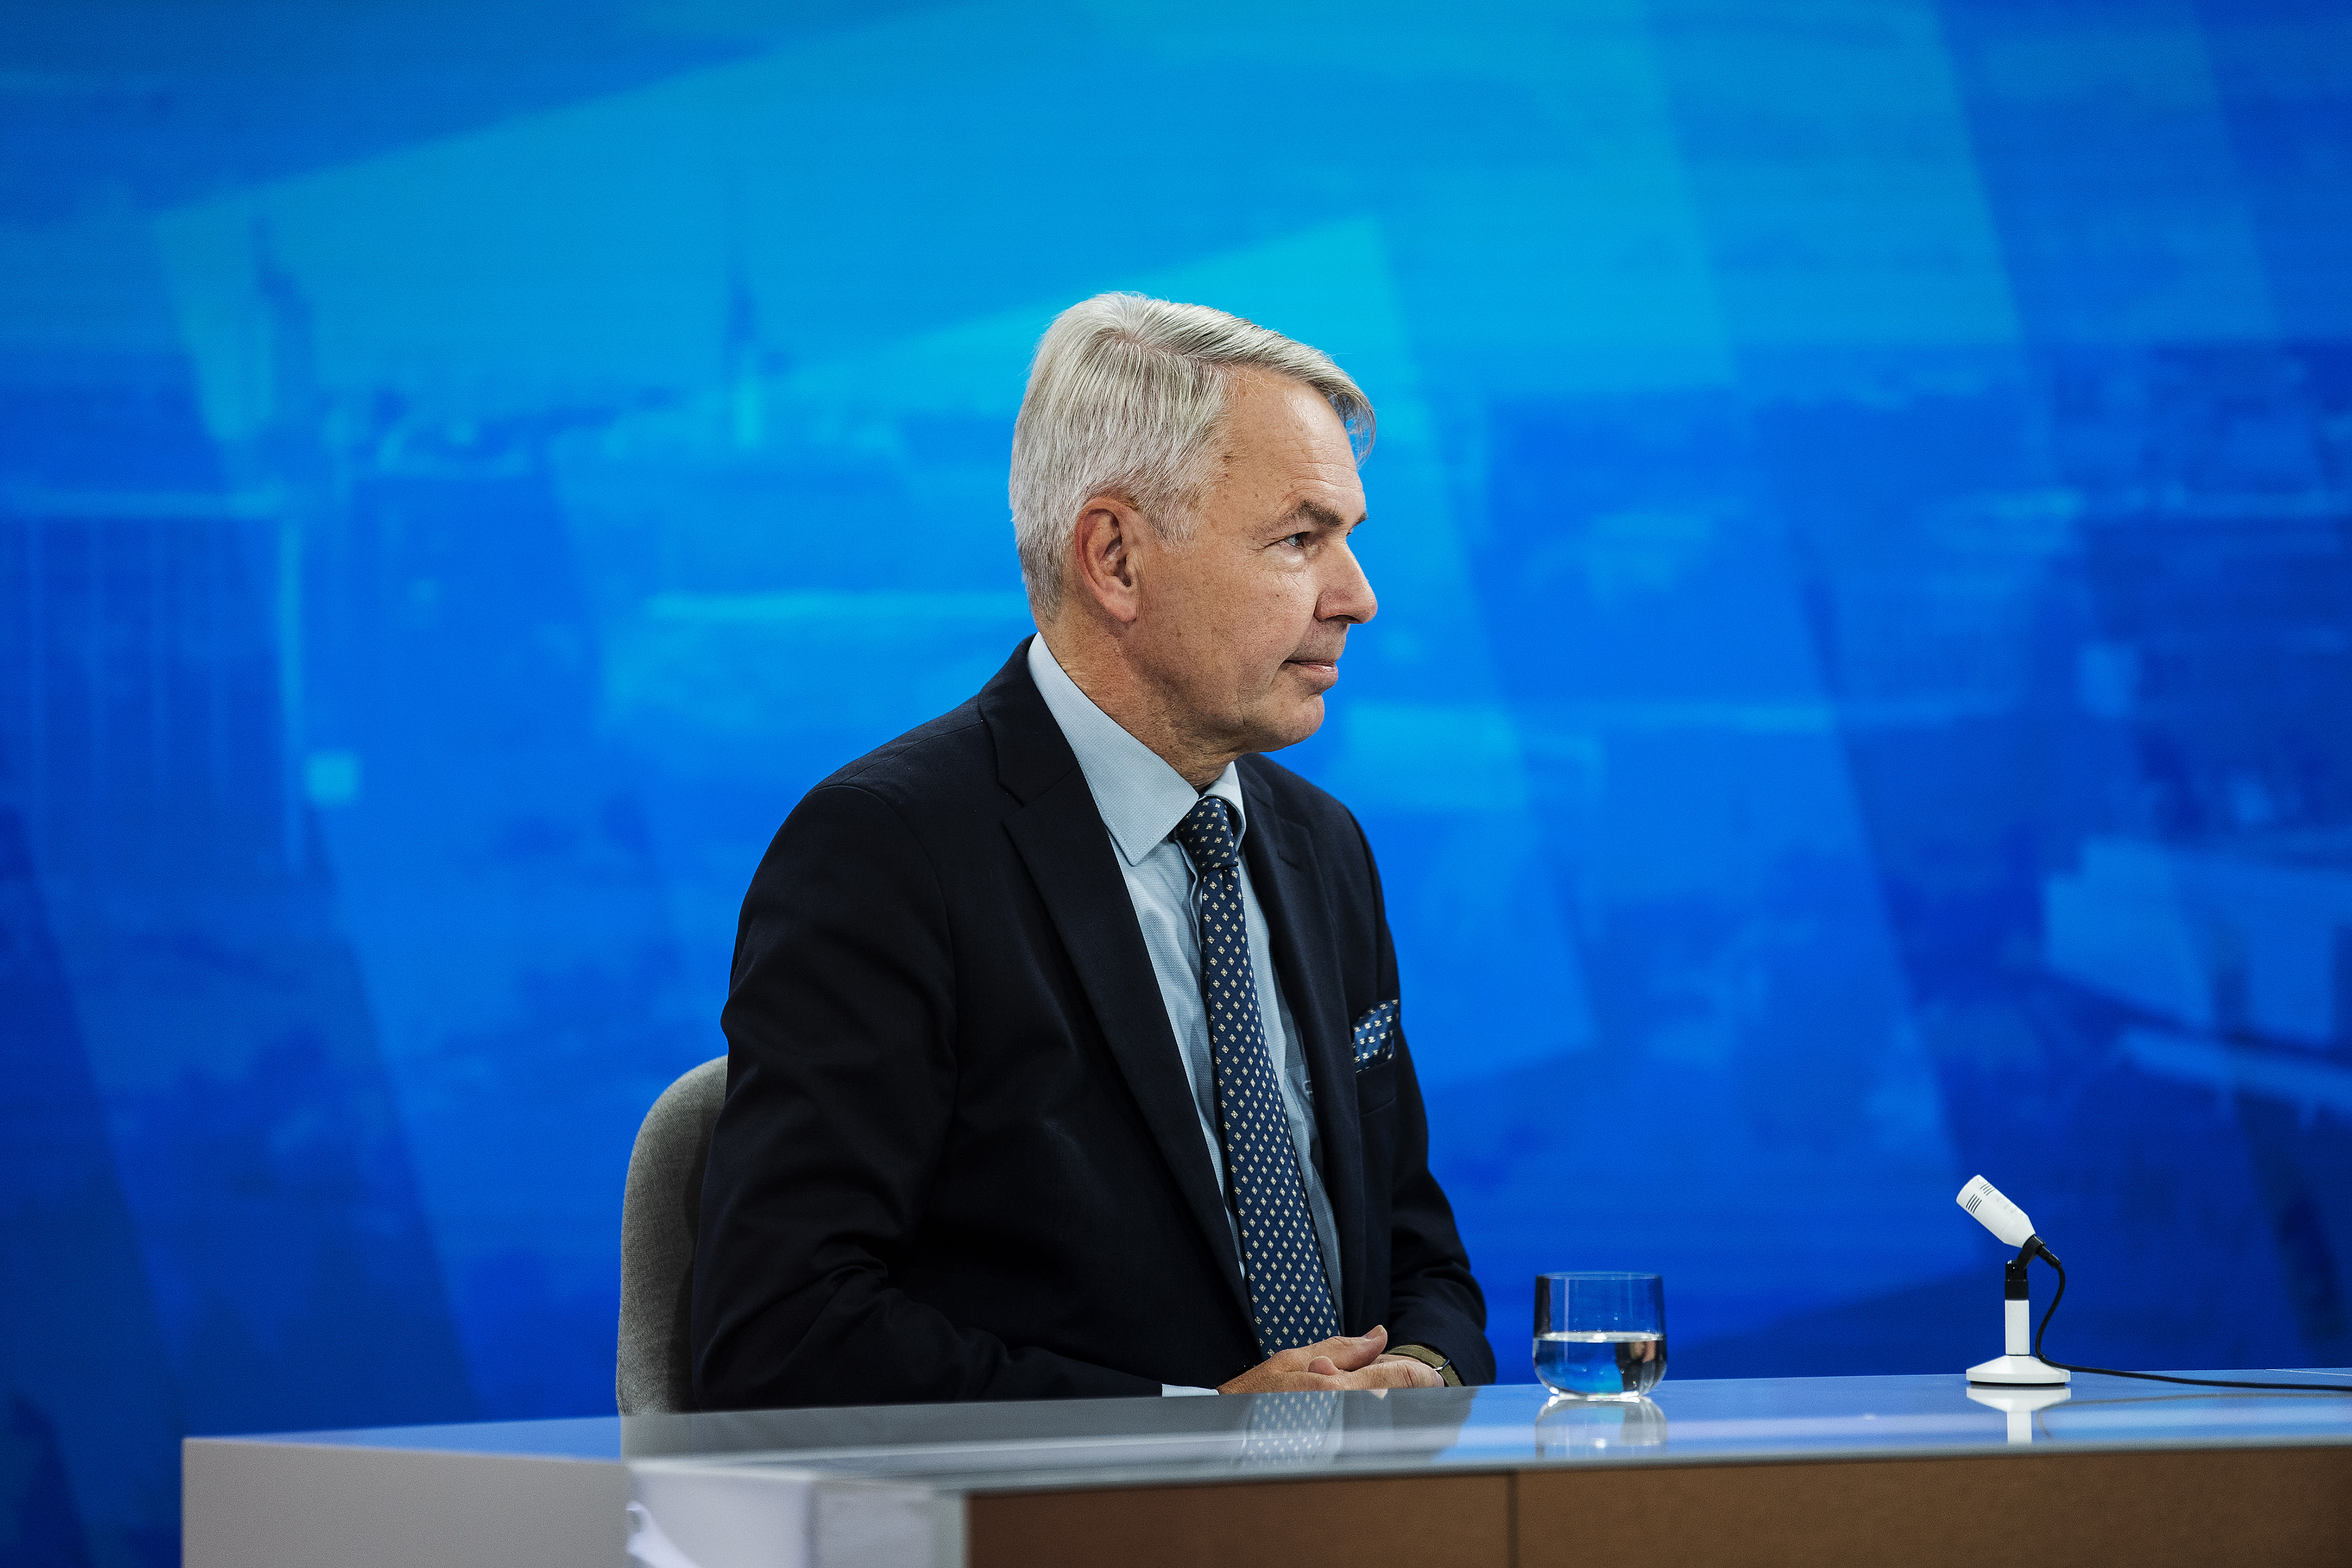 Haavisto: Finland would receive support from NATO partners in connection with a direct threat, even before full membership